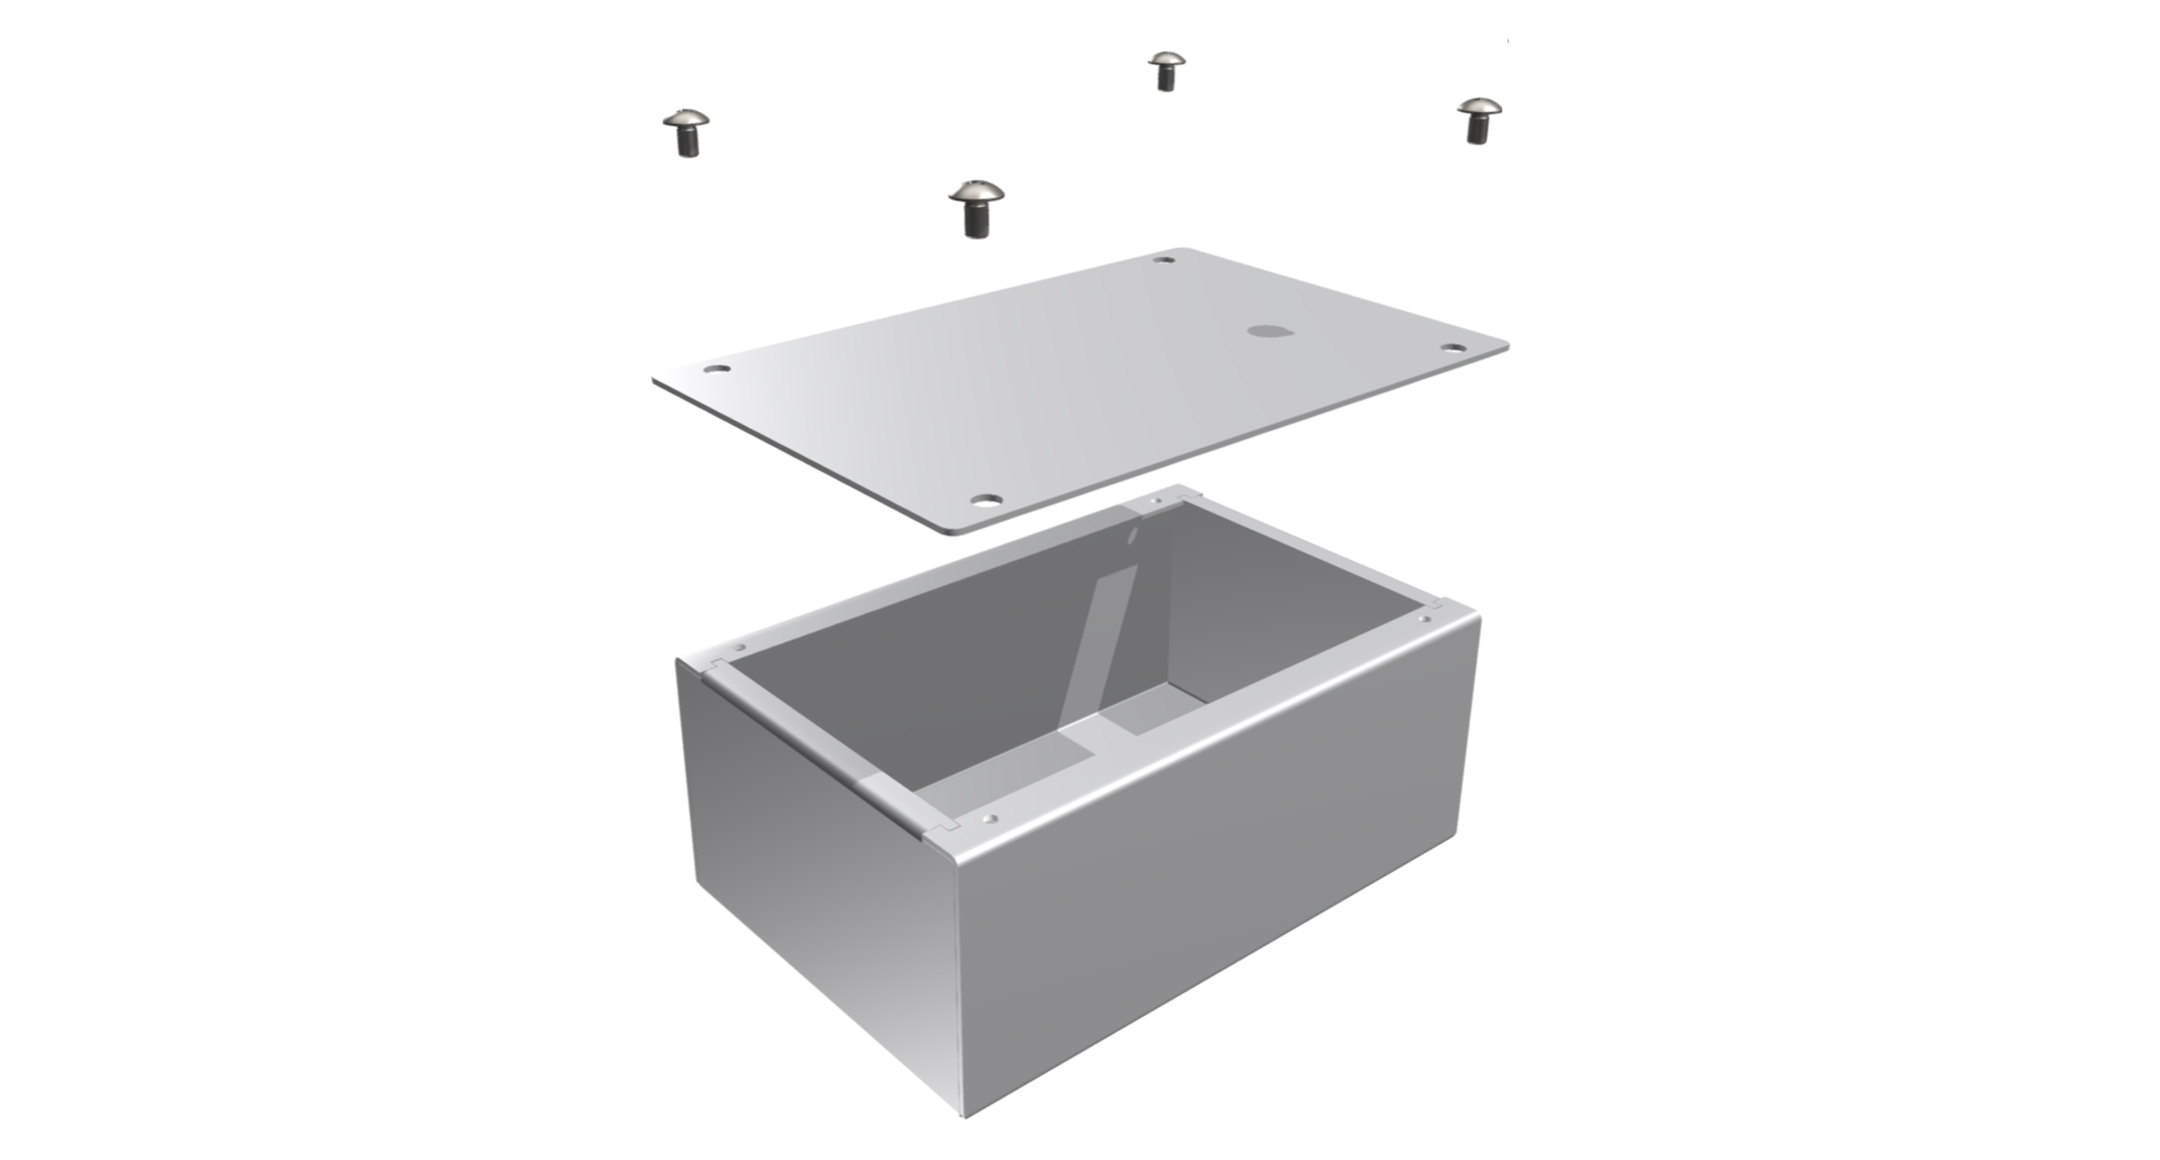 Silver 68x145x200mm Durable Aluminum Project Box Easy to Assemble for GPRS Aluminum Case PCB Junction Aluminum Box Shielded Aluminum Box 